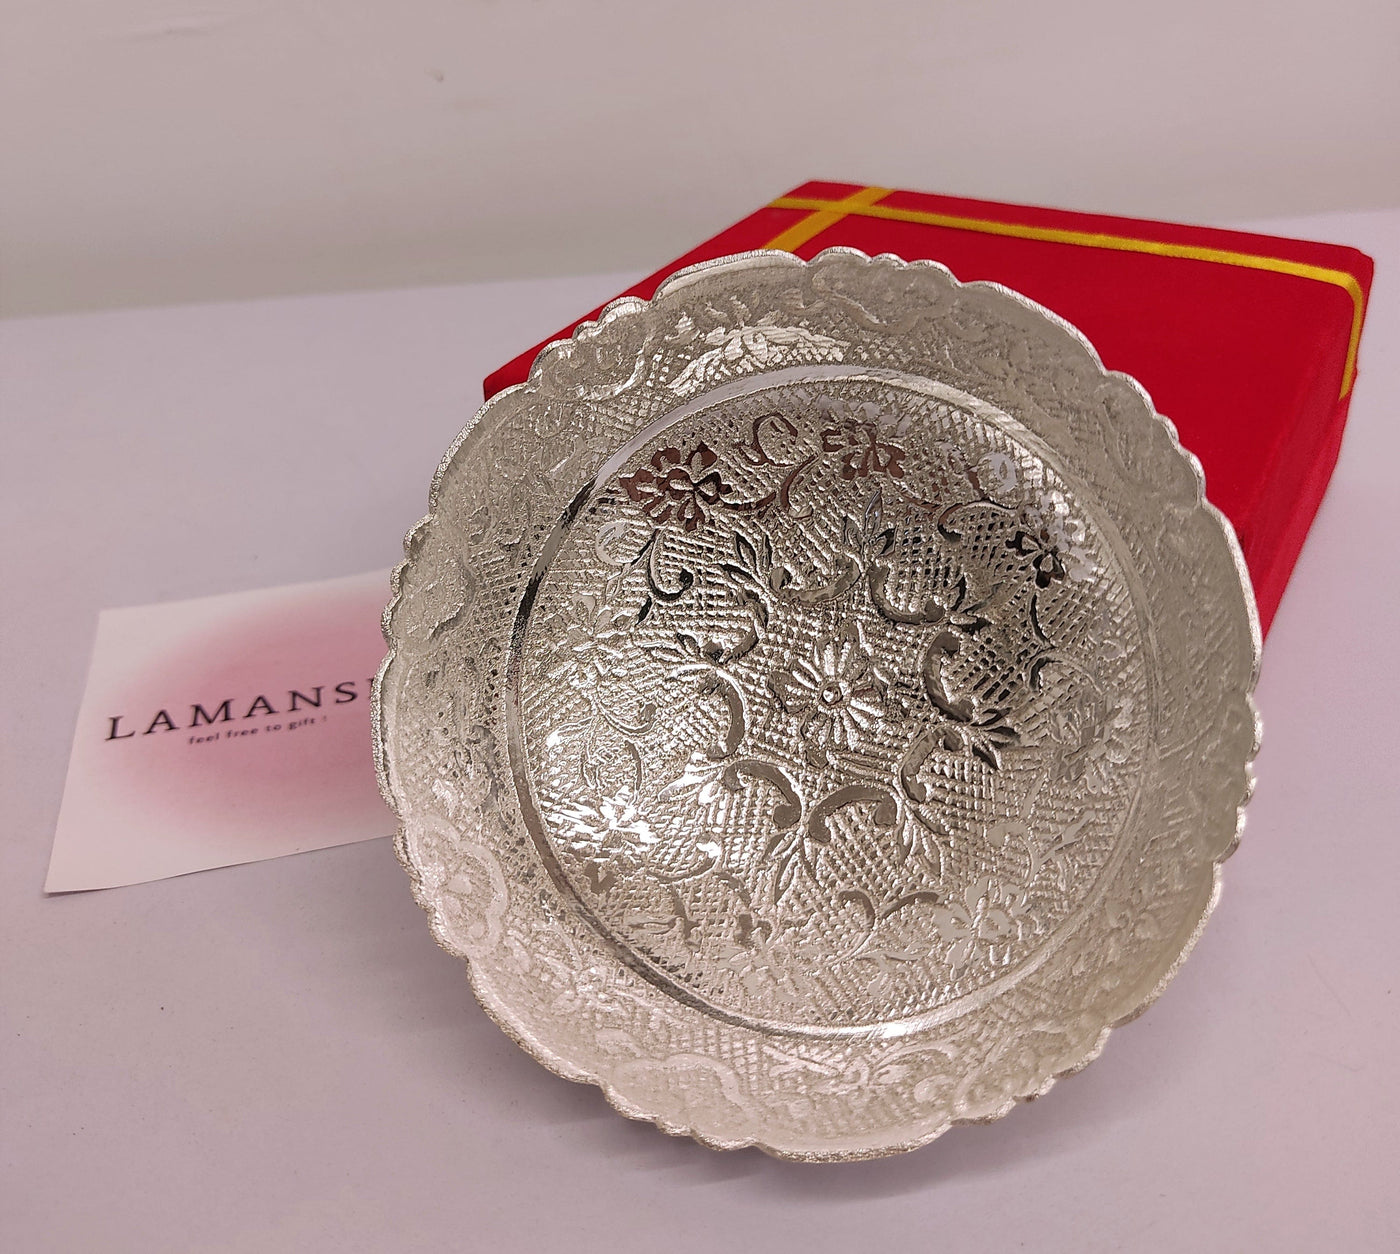 280 Rs per set🏷on ordering in bulk | Call 📞 at 8619550223 Sliver Bowl set LAMANSH® German Silver Plated Bowl set for Return Gifting 🎁 | Heavy Brass Bowls for wedding favors (100 grams each box)